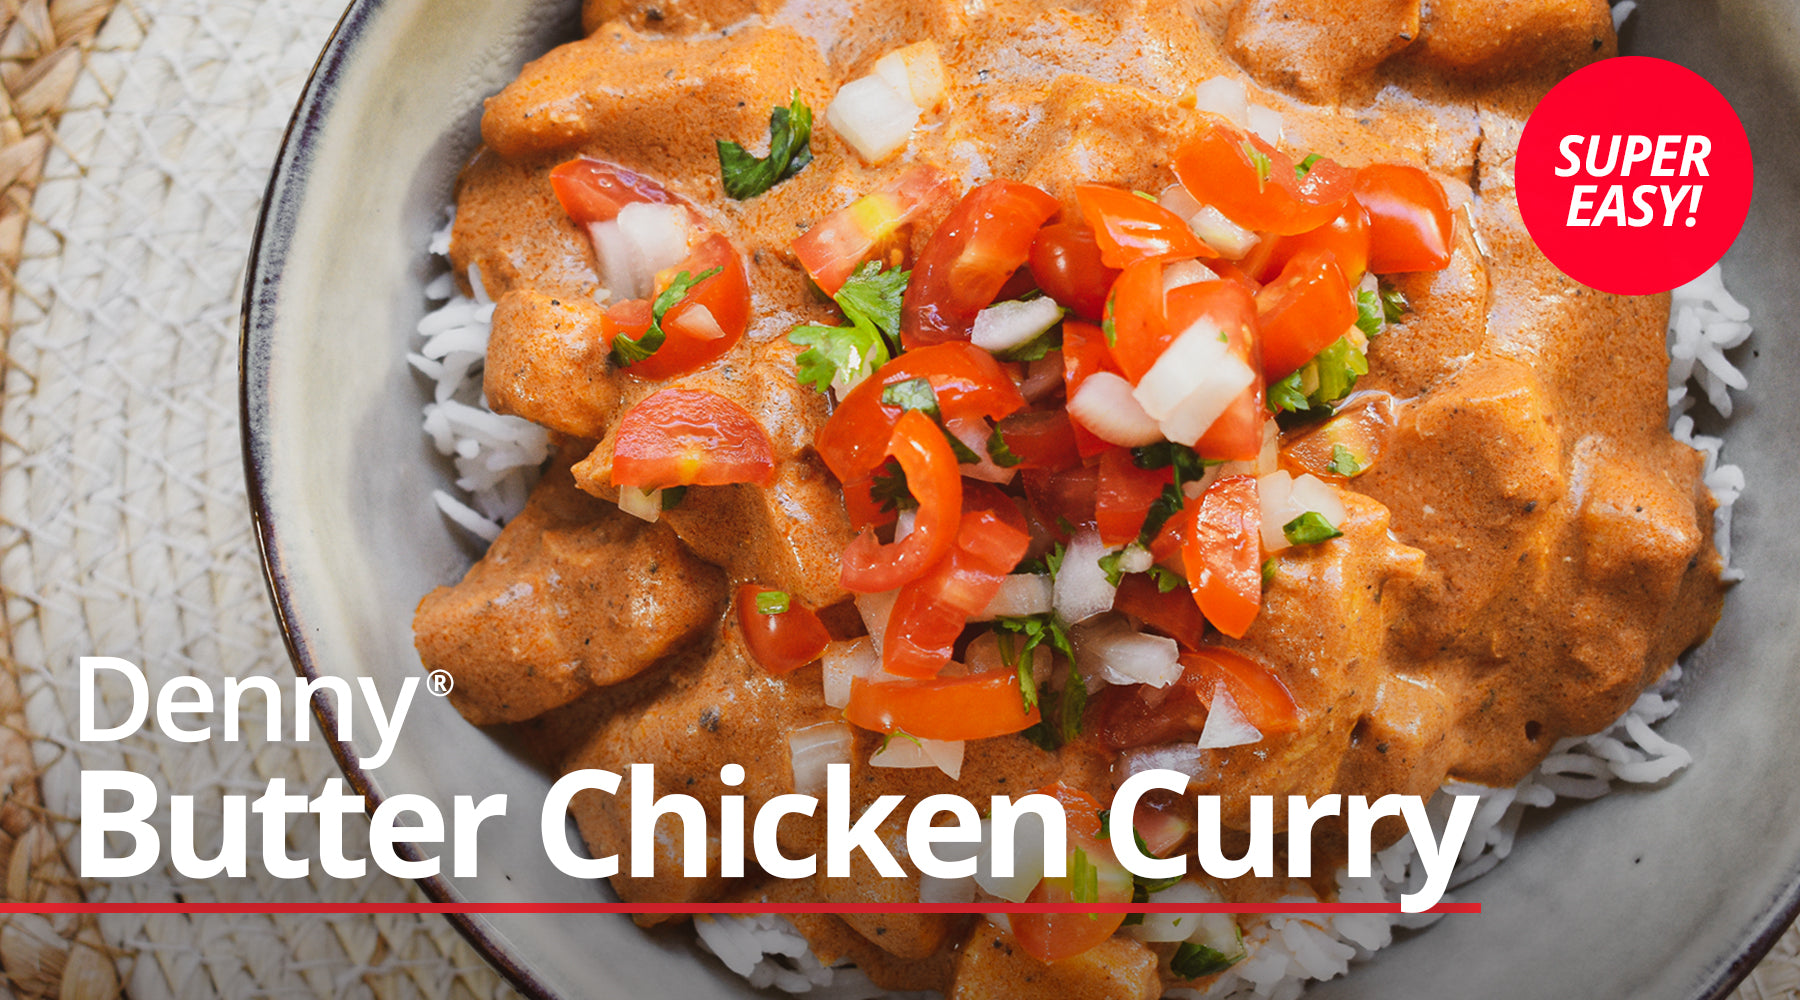 Super-Easy Denny Butter Chicken Curry